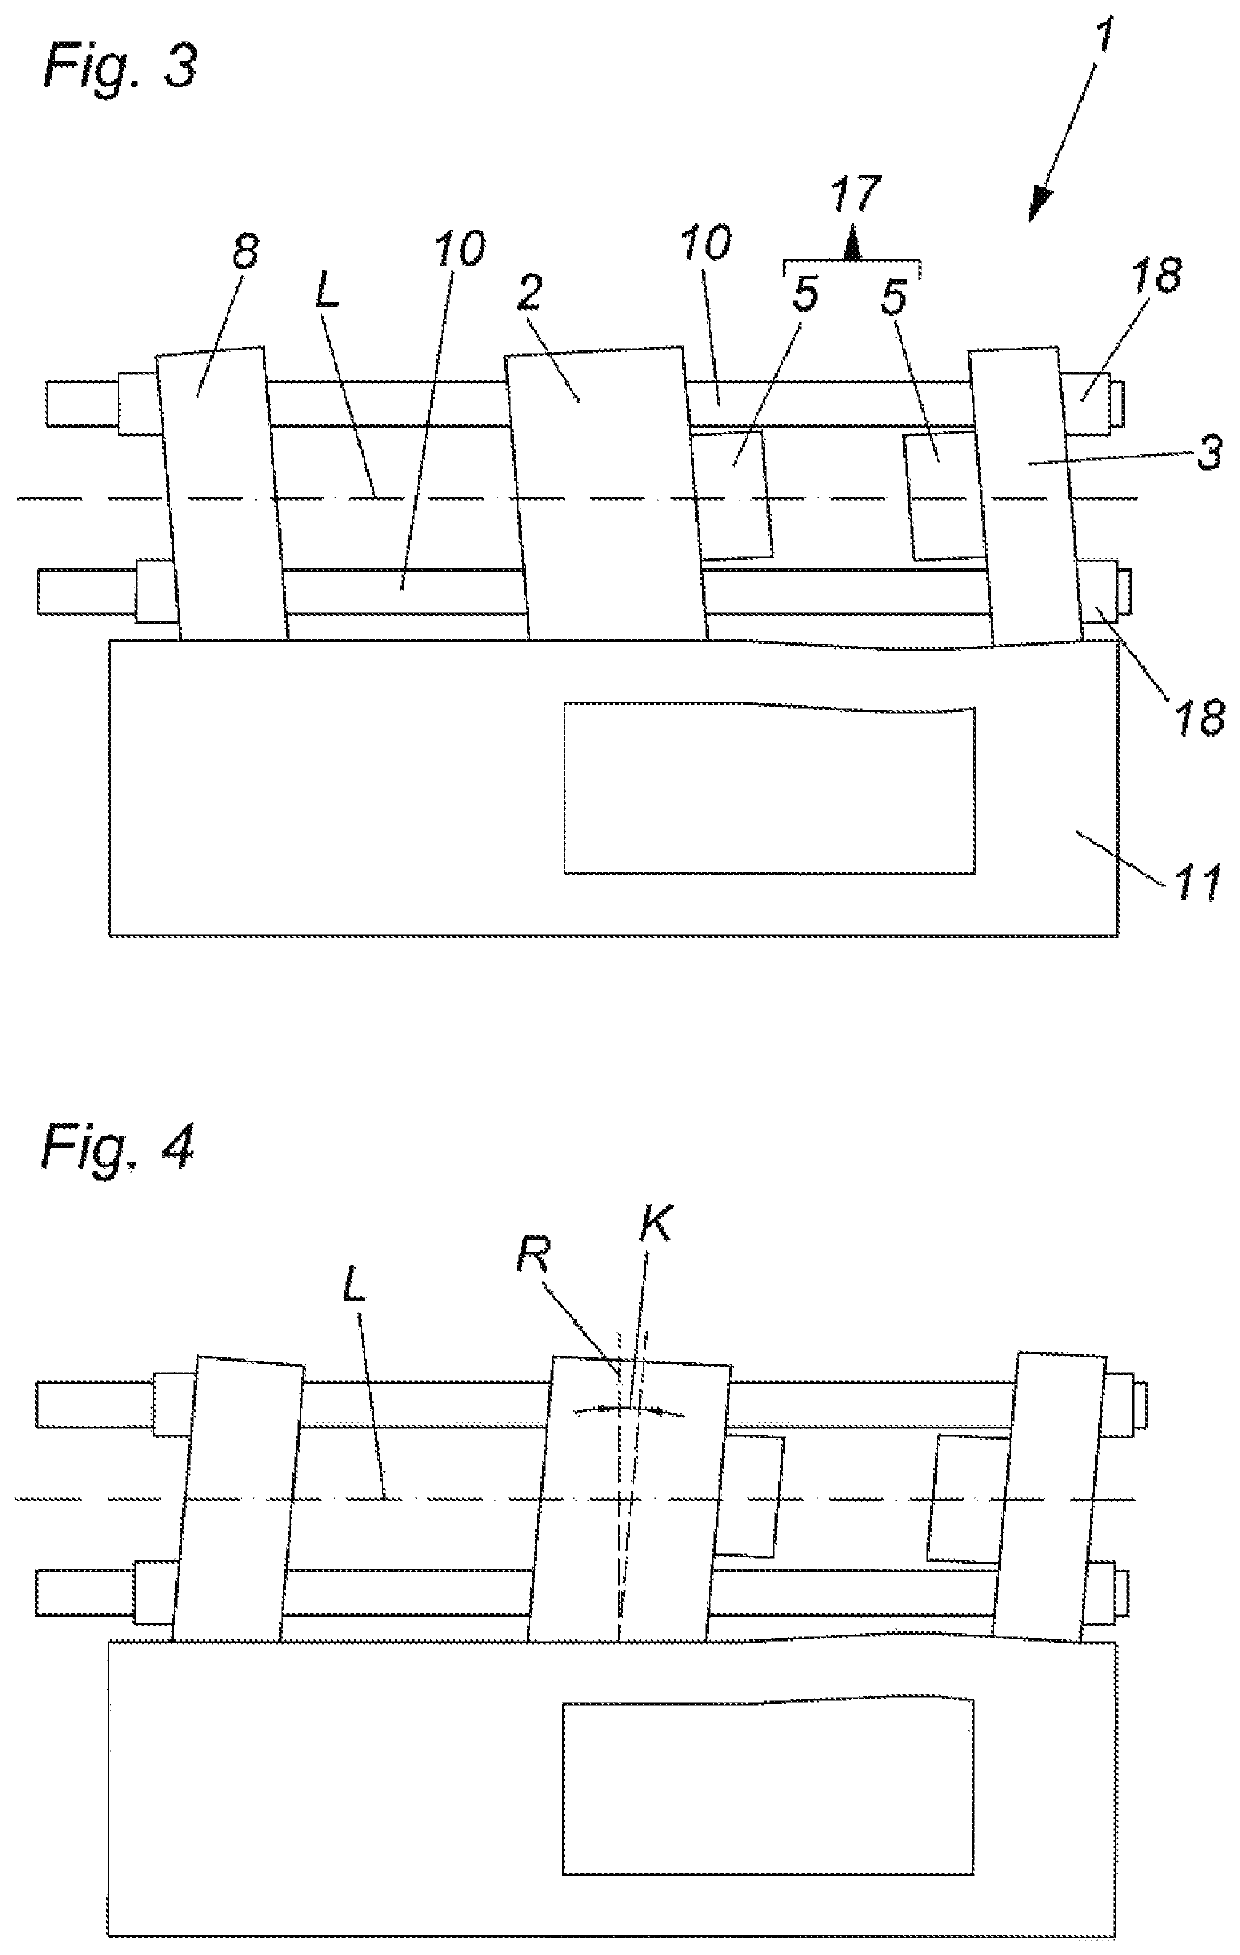 Method for moving a movable platen